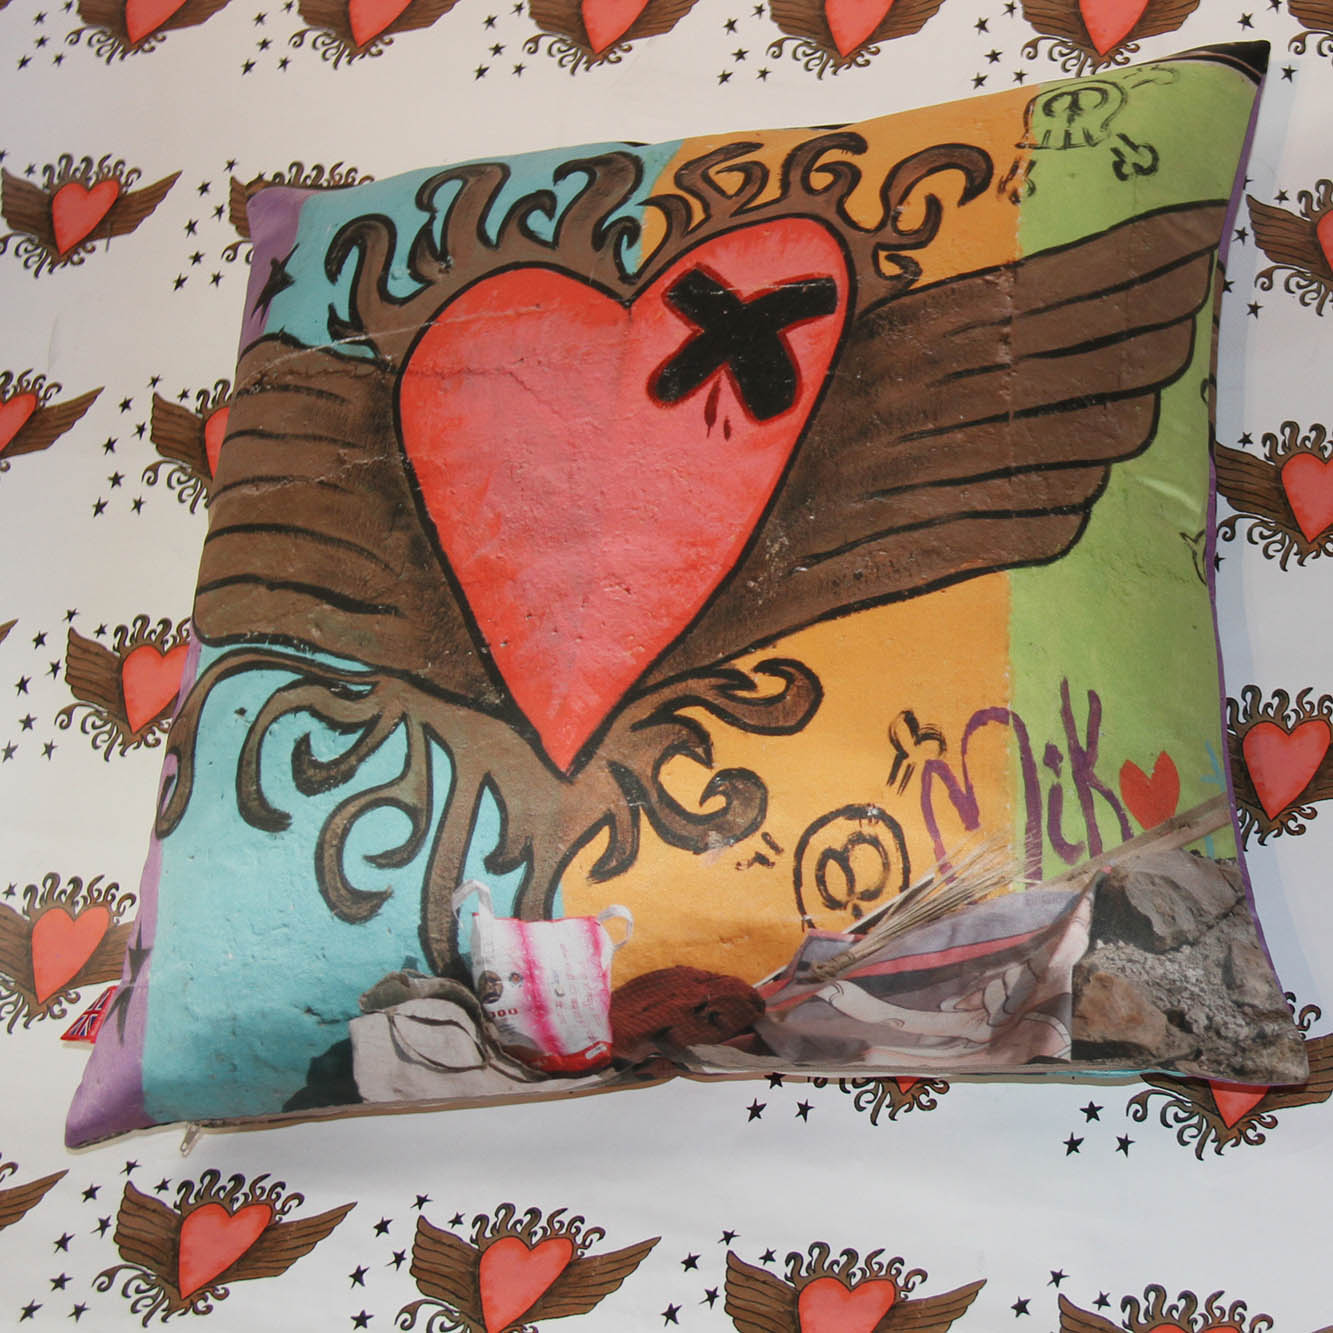 graffiti art with heart with wings cushion on heart design background